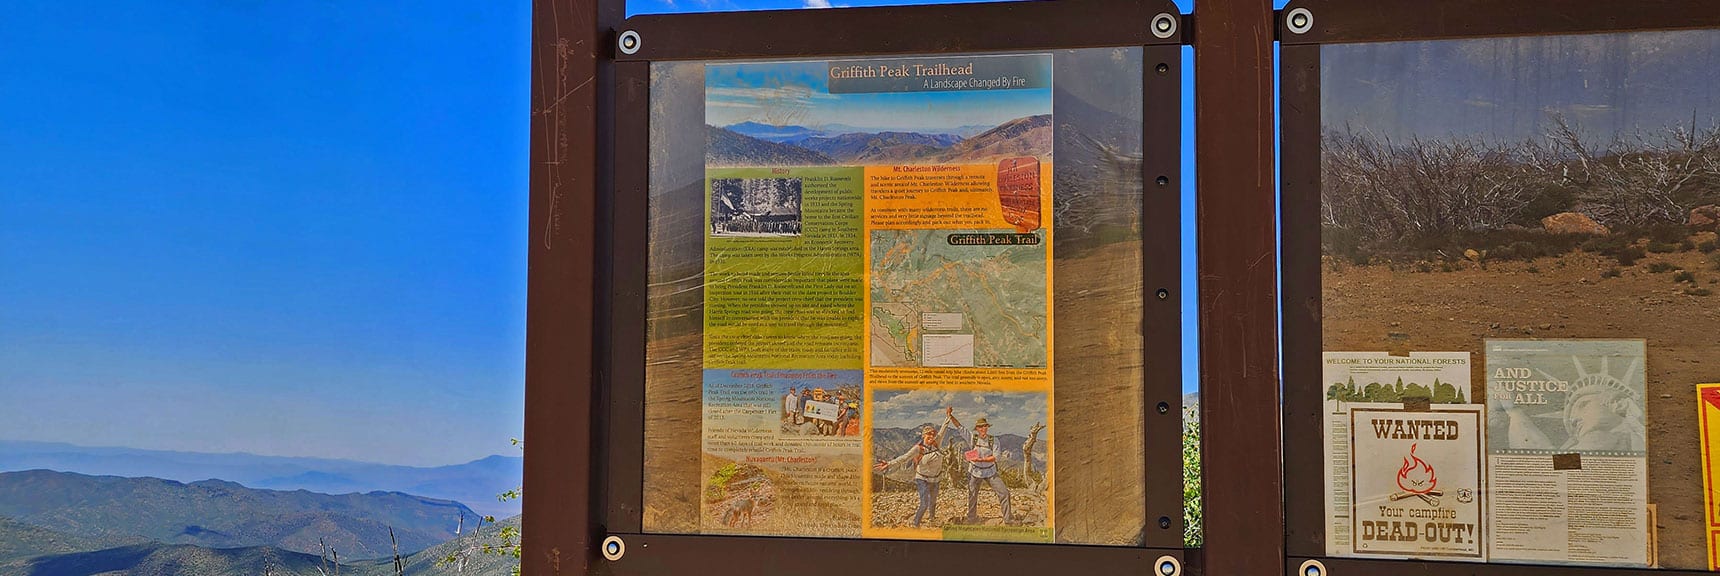 Story of Harris Mt. Road and Griffith Peak Trail. | Wilson Ridge to Harris Mountain | Lovell Canyon, Nevada